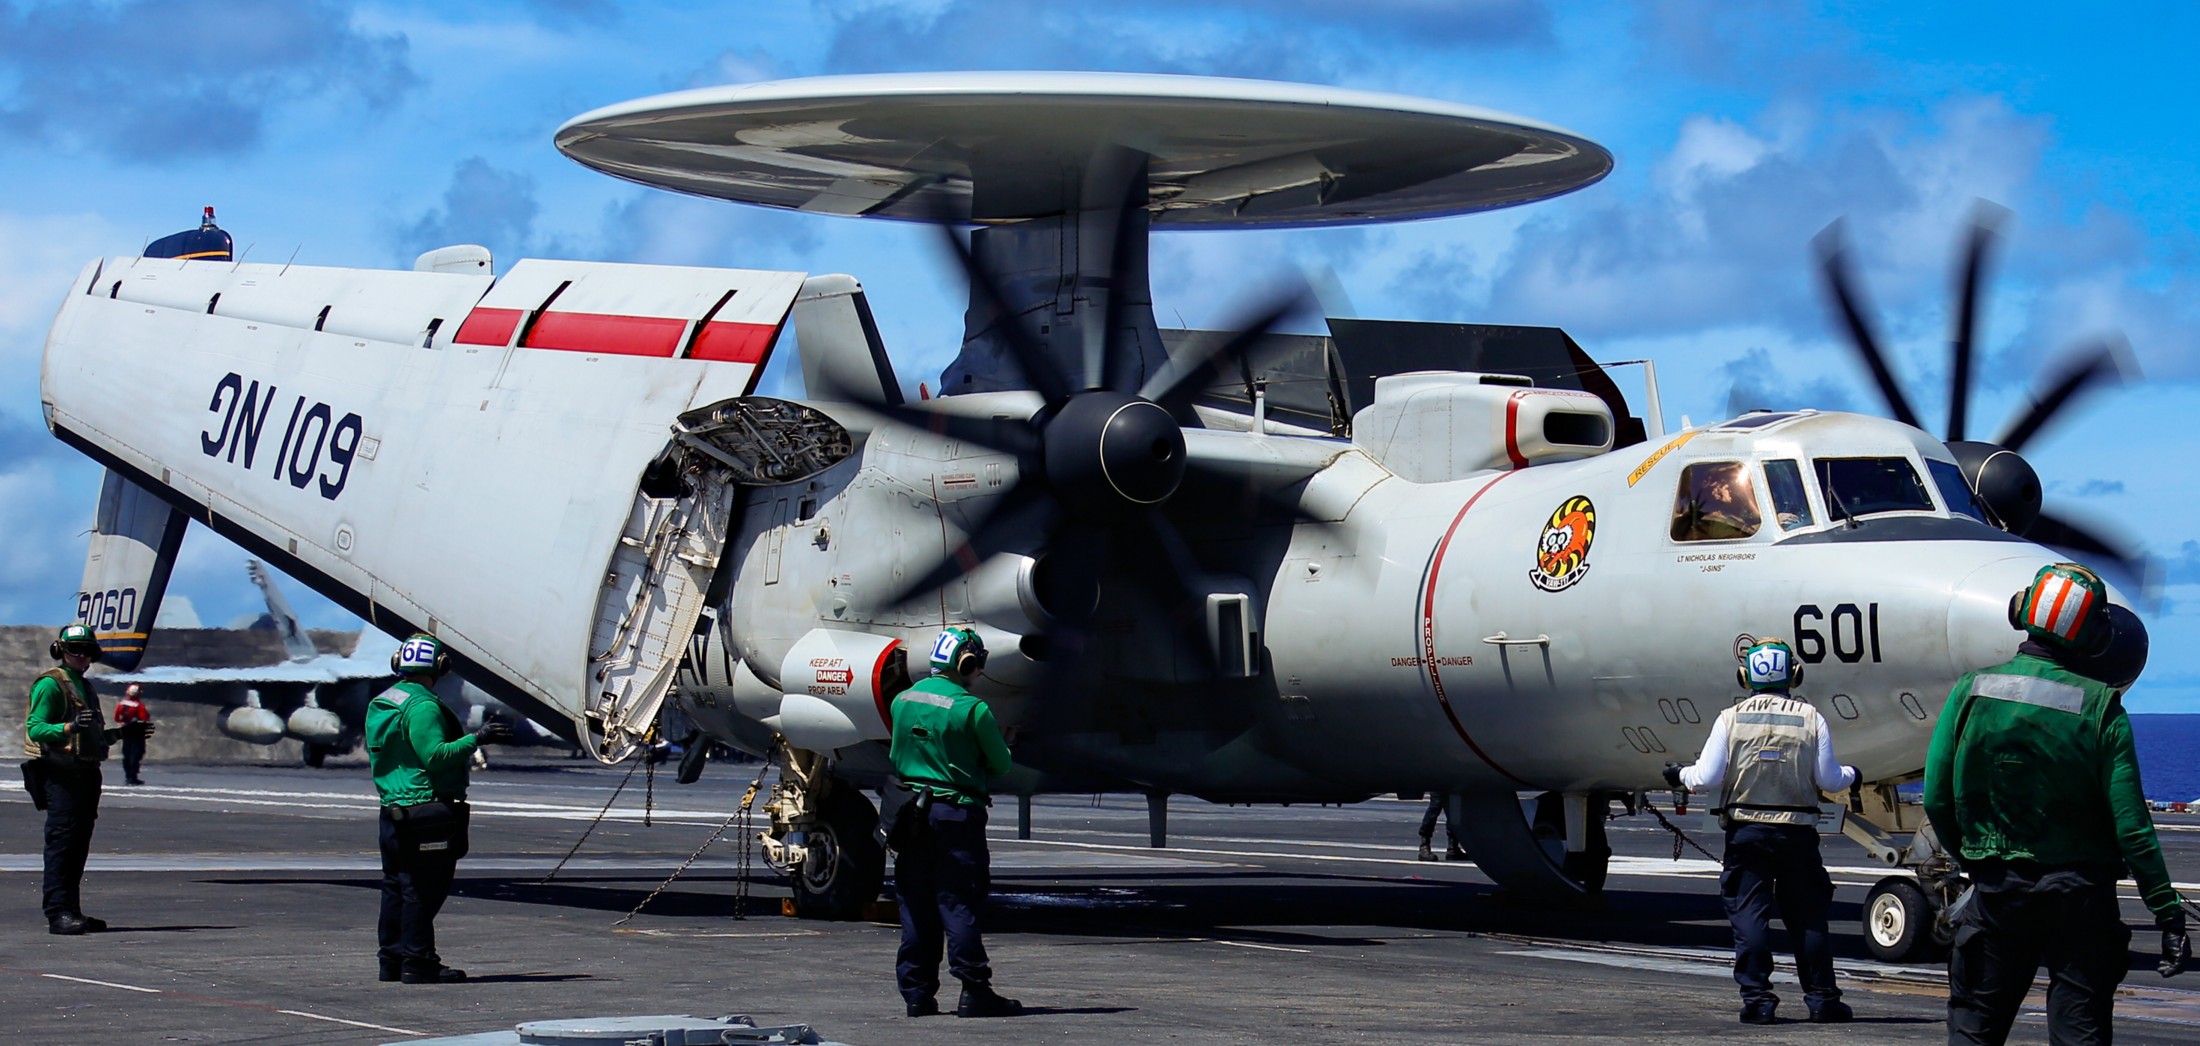 vaw-117 wallbangers airborne command and control squadron navy e-2d hawkeye cvw-9 uss abraham lincoln cvn-72 09